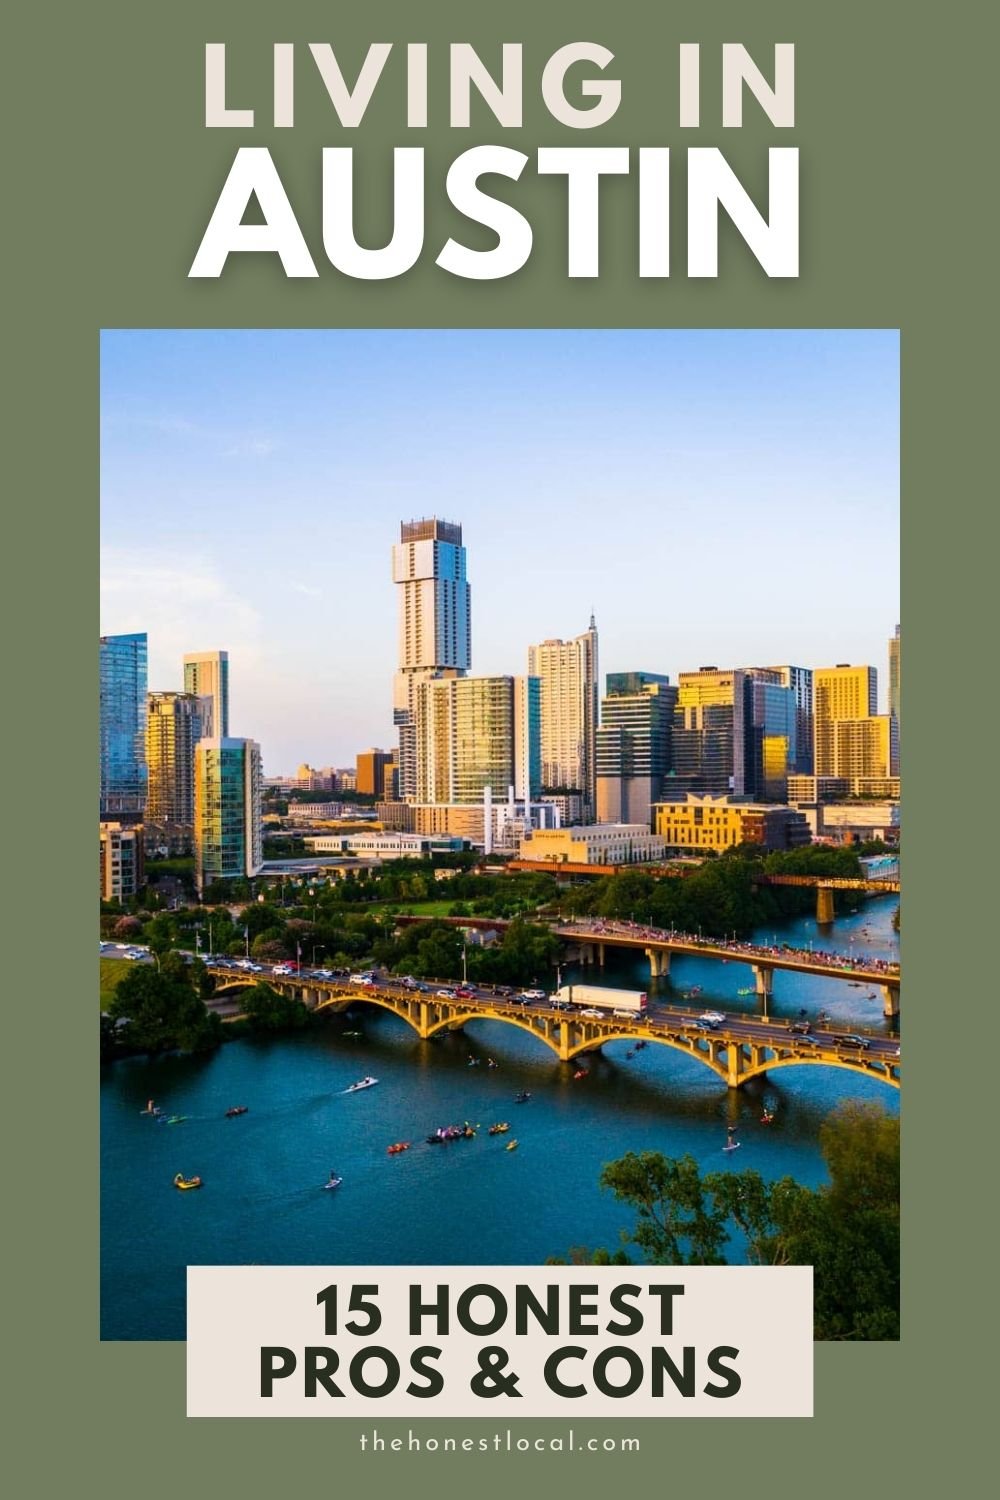 Pros and cons of living in Austin Texas